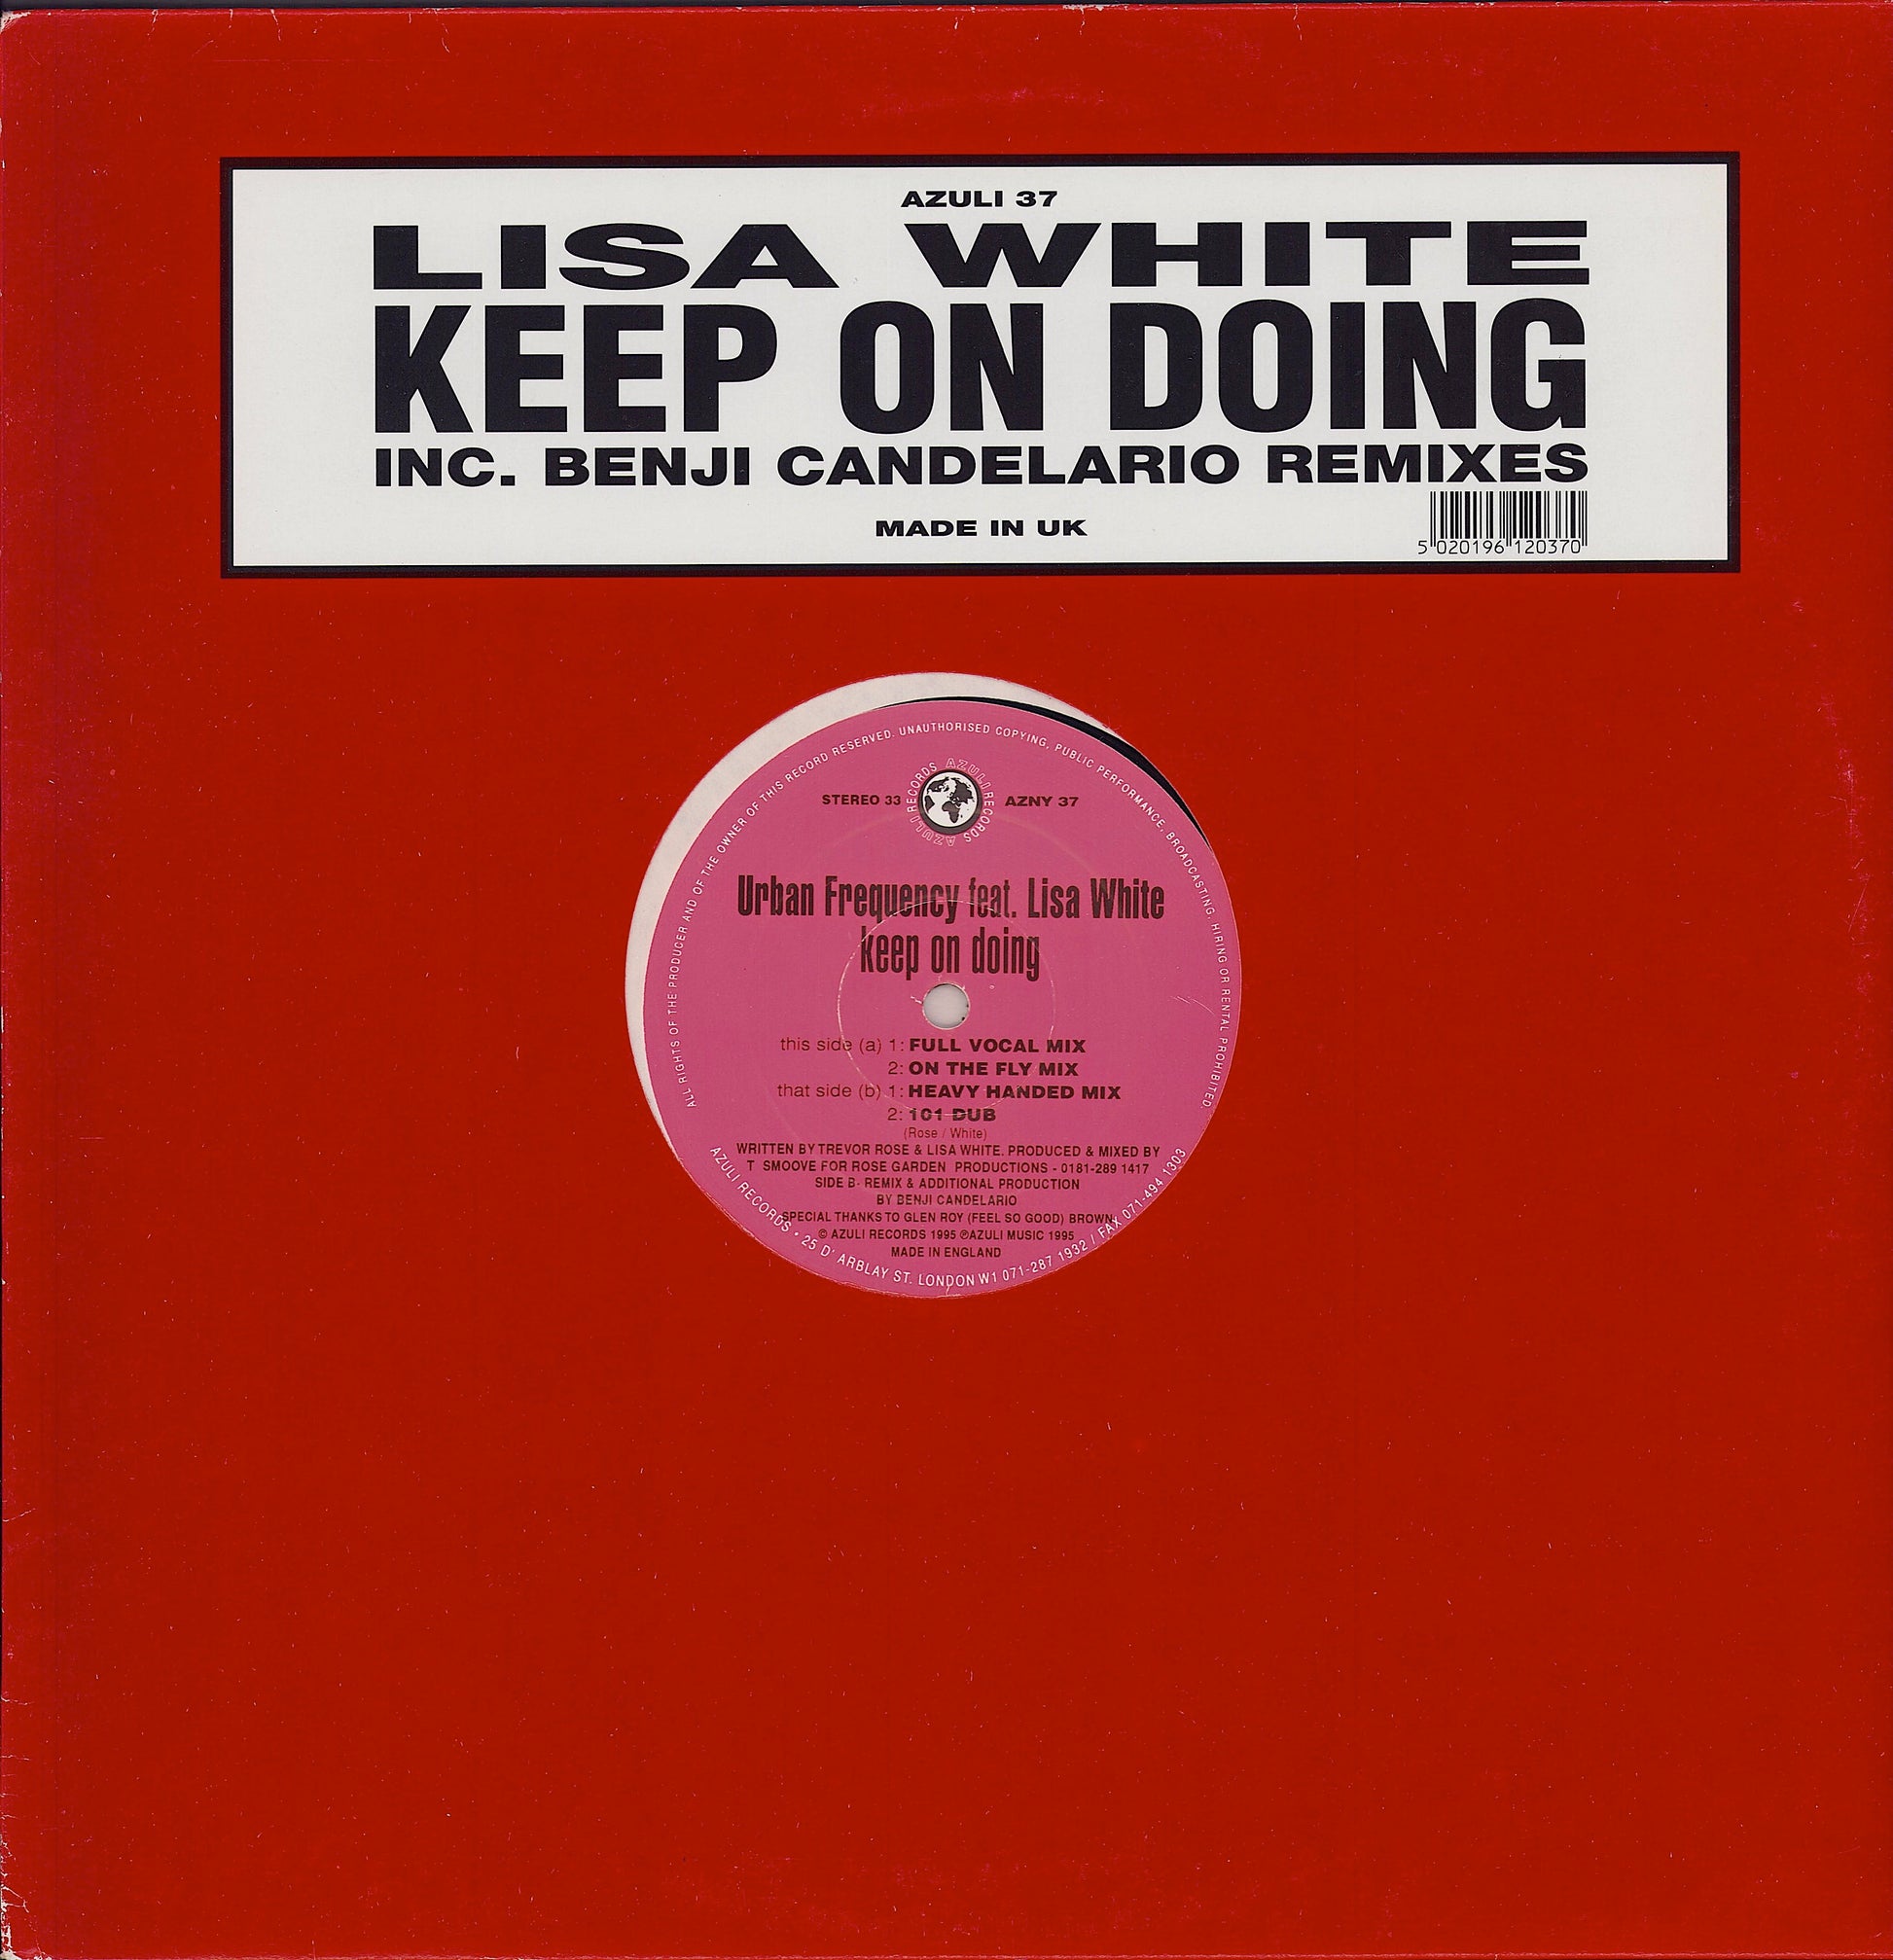 Urban Frequency Feat. Lisa White ‎- Keep On Doing (Vinyl 12")